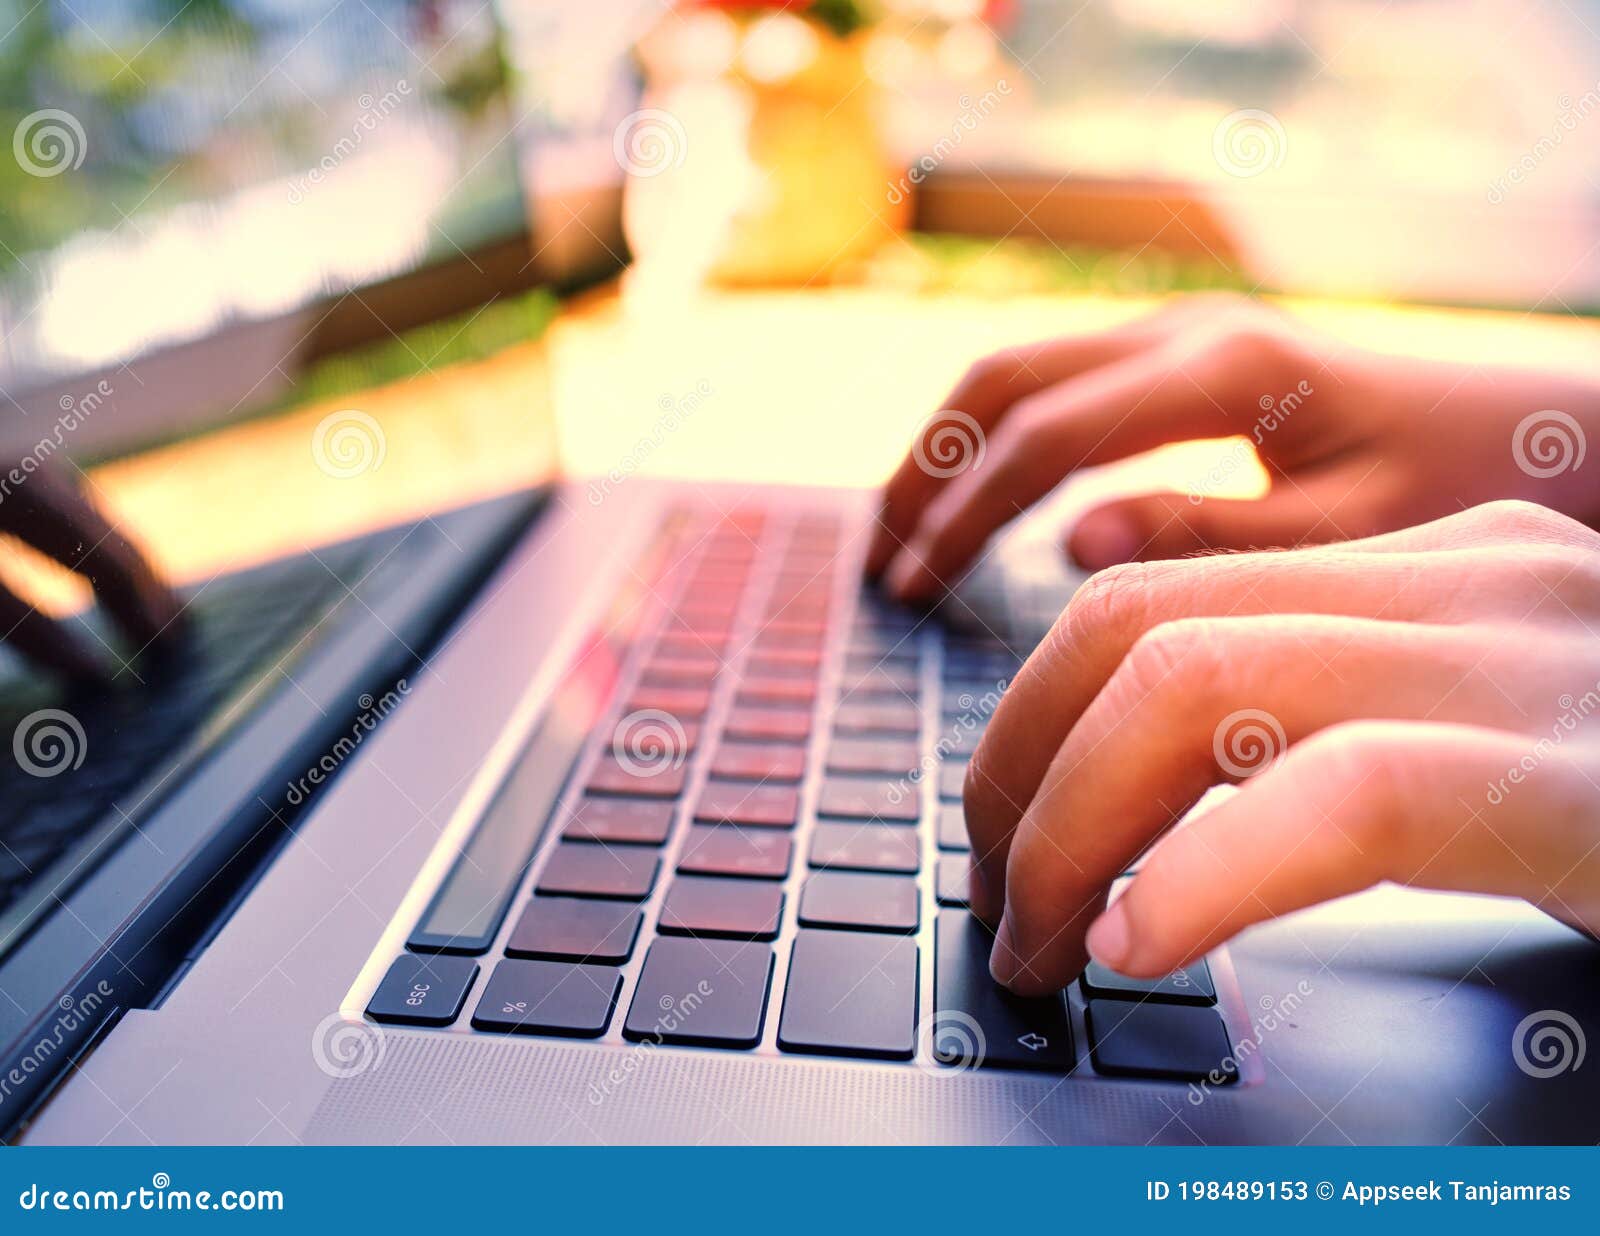 girl-hand-typing-laptop-keyboard-in-concept-coffee-shop-wireless-data